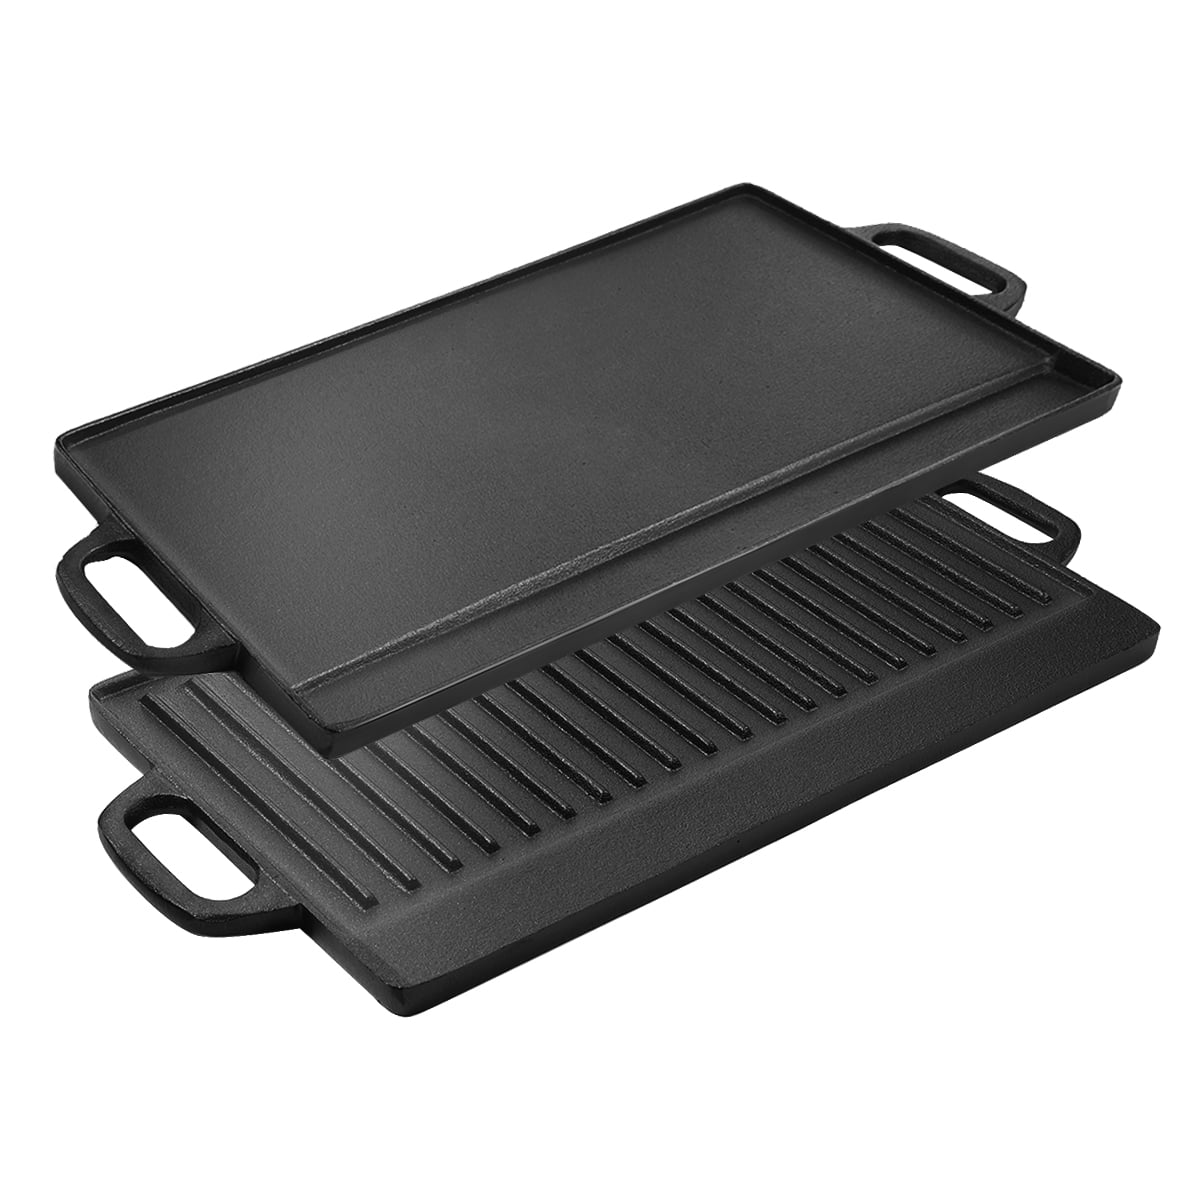 STOVES Genuine Oven Cooker Griddle Pan Top Grill Plate Frying Hotplate 